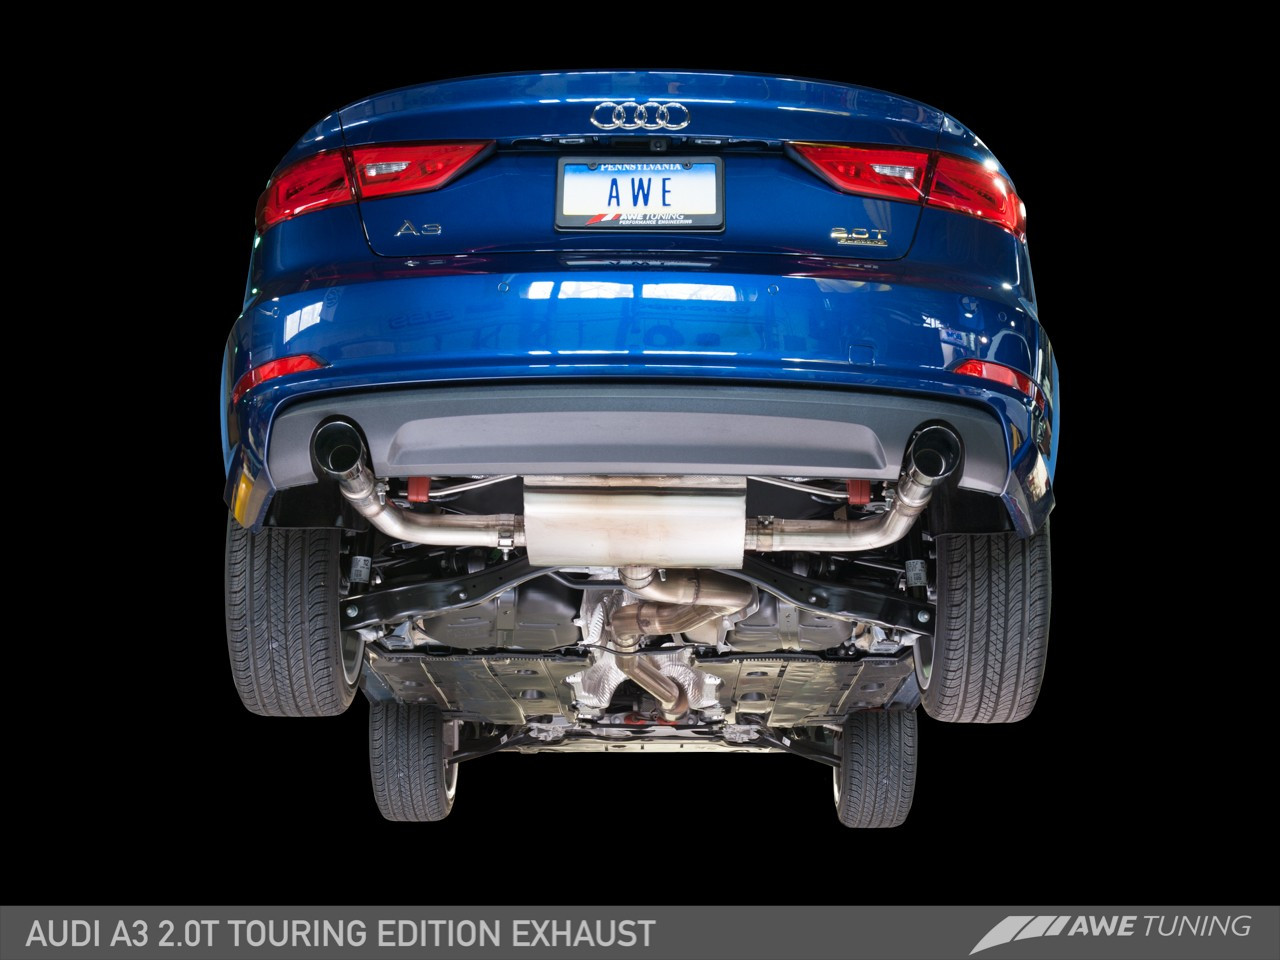 AWE Touring Edition Catback Exhaust for 8V A3 2.0T Quattro